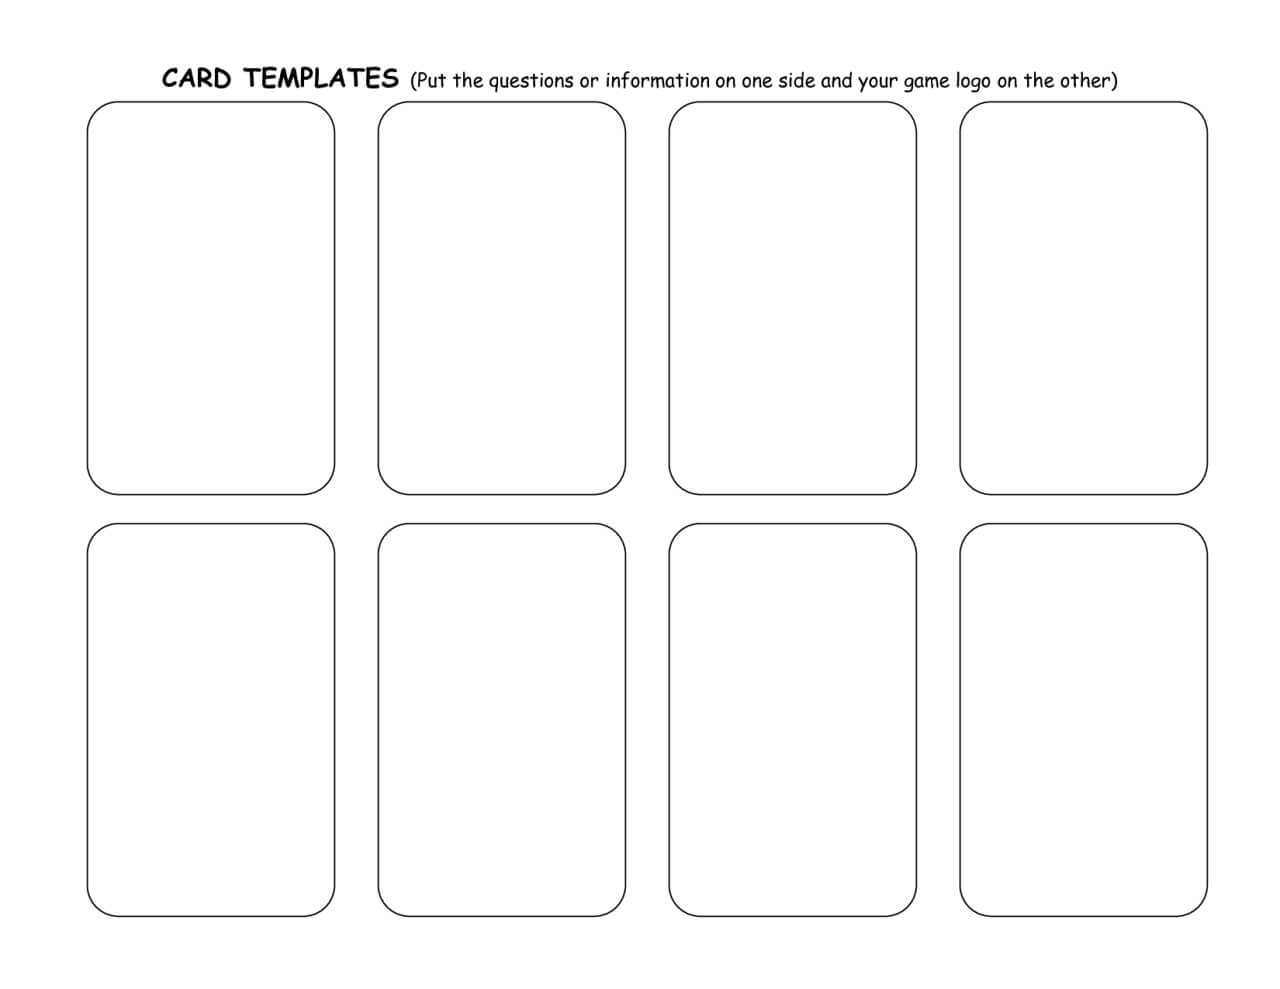 Trading Card Game Template – Free Download In 2019 | Trading Within Trading Cards Templates Free Download